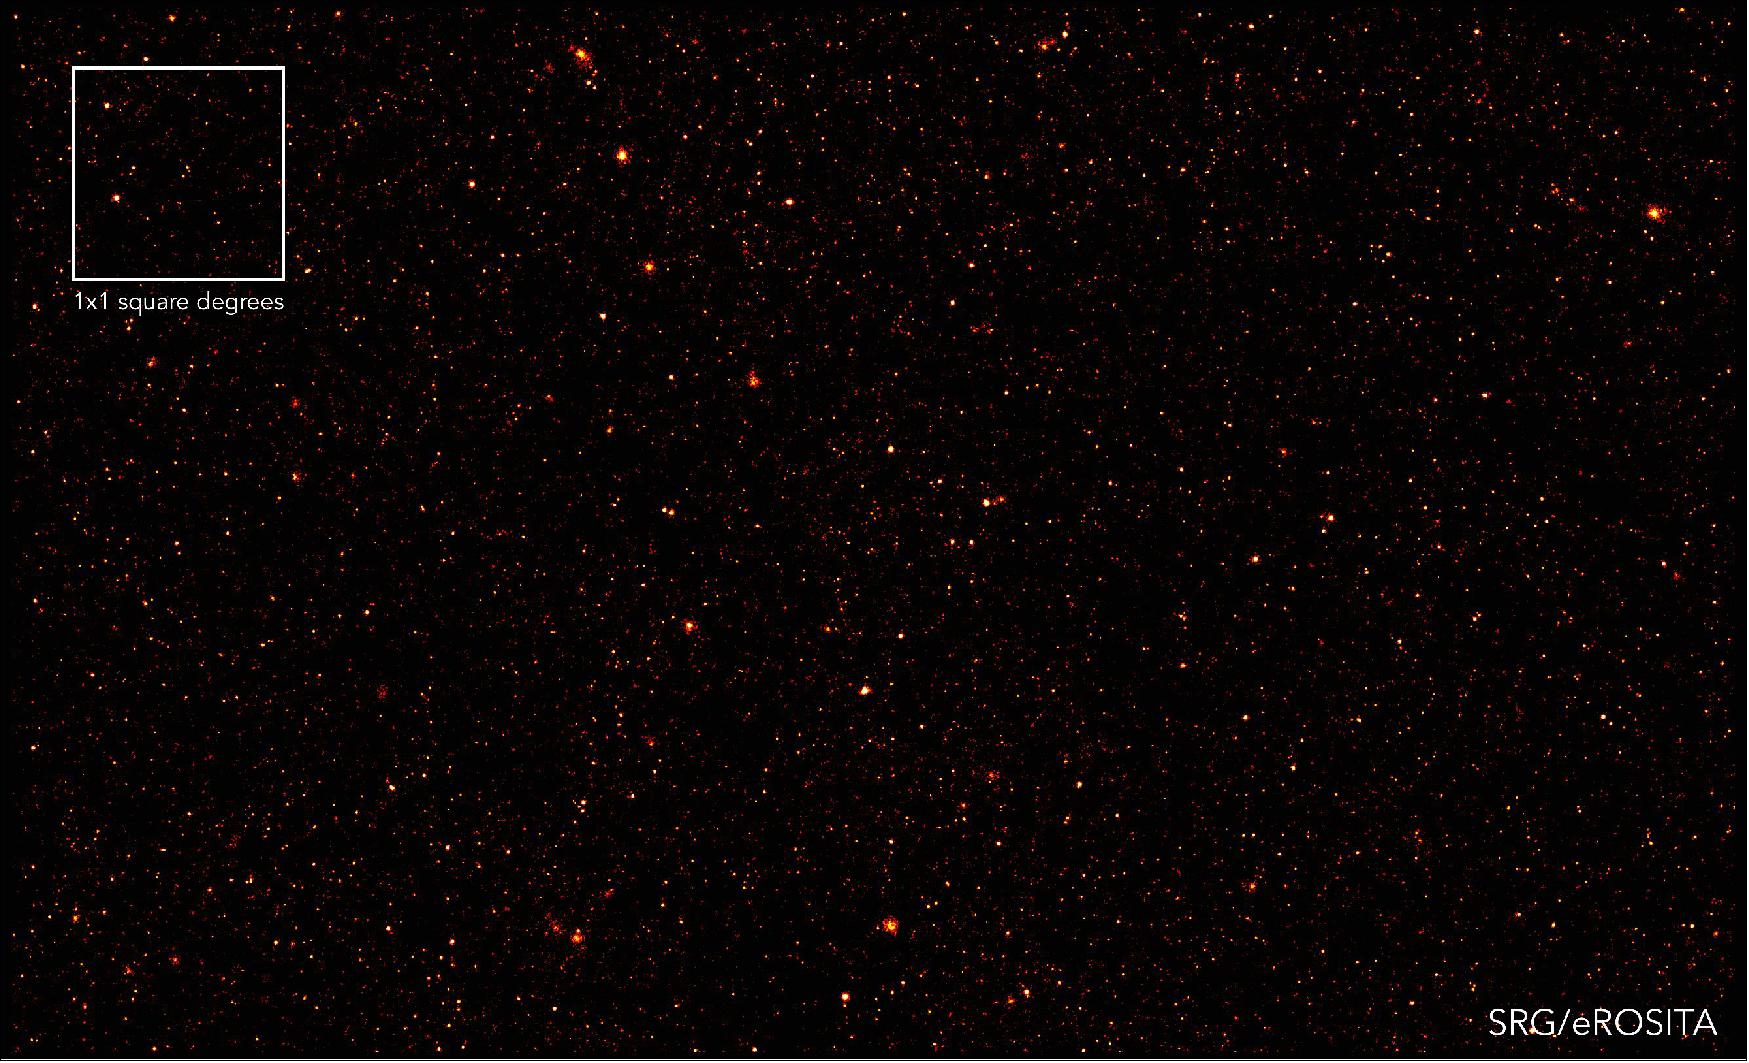 Figure 27: A patch of the X-ray sky covering an area of about 1/1000 of the whole celestial sphere observed by eROSITA, forming part of its performance verification survey ‘eFEDS’. At the end of the 4-year all-sky survey, maps of the same quality and depth will be available for the entire sky. The image was generated from photons in the 0.5-2 keV energy range (image credit: V. Ghirardini, MPE/IKI)